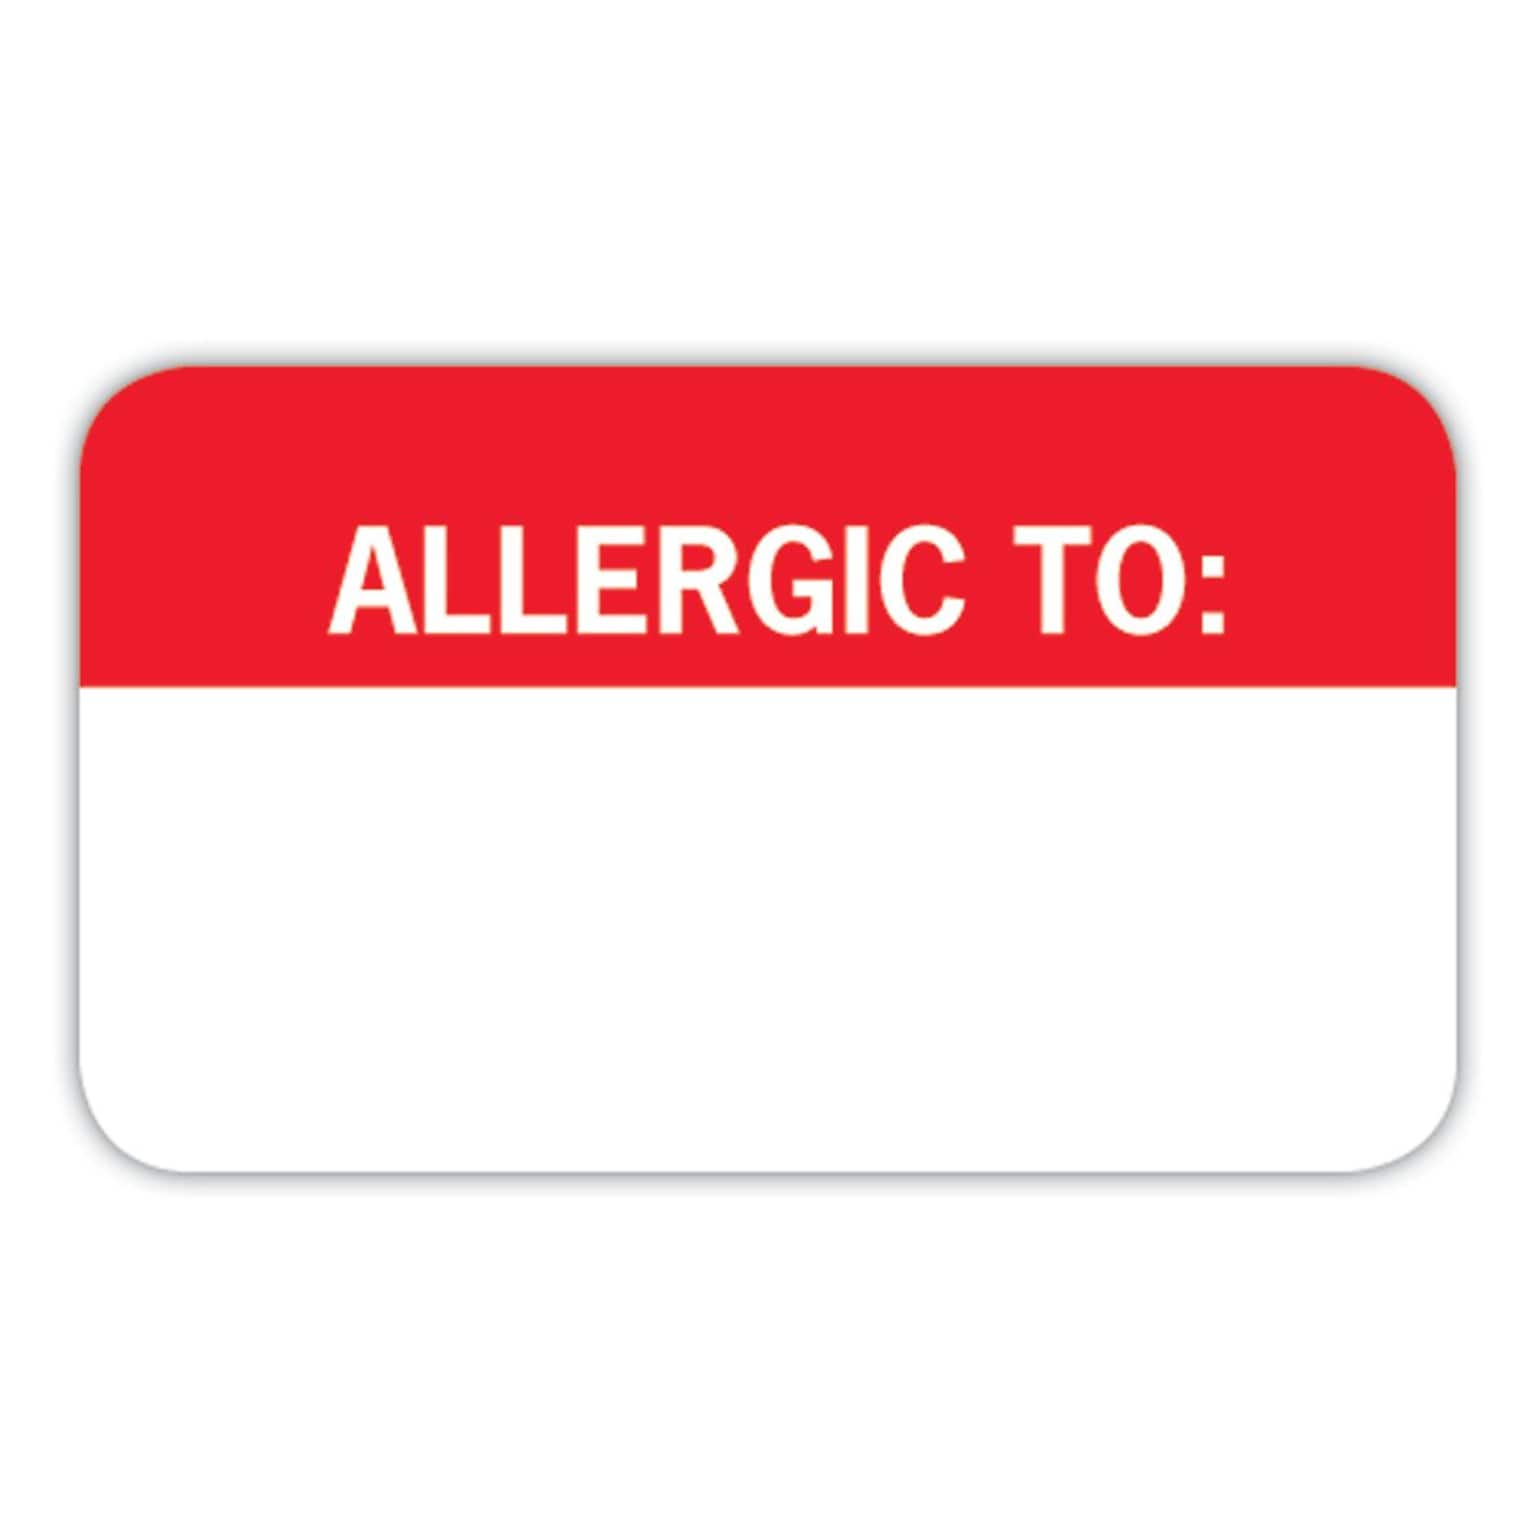 Medical Arts Press® Allergy Warning Medical Labels, Allergic To:, Red and White, 7/8x1-1/2, 250 Labels